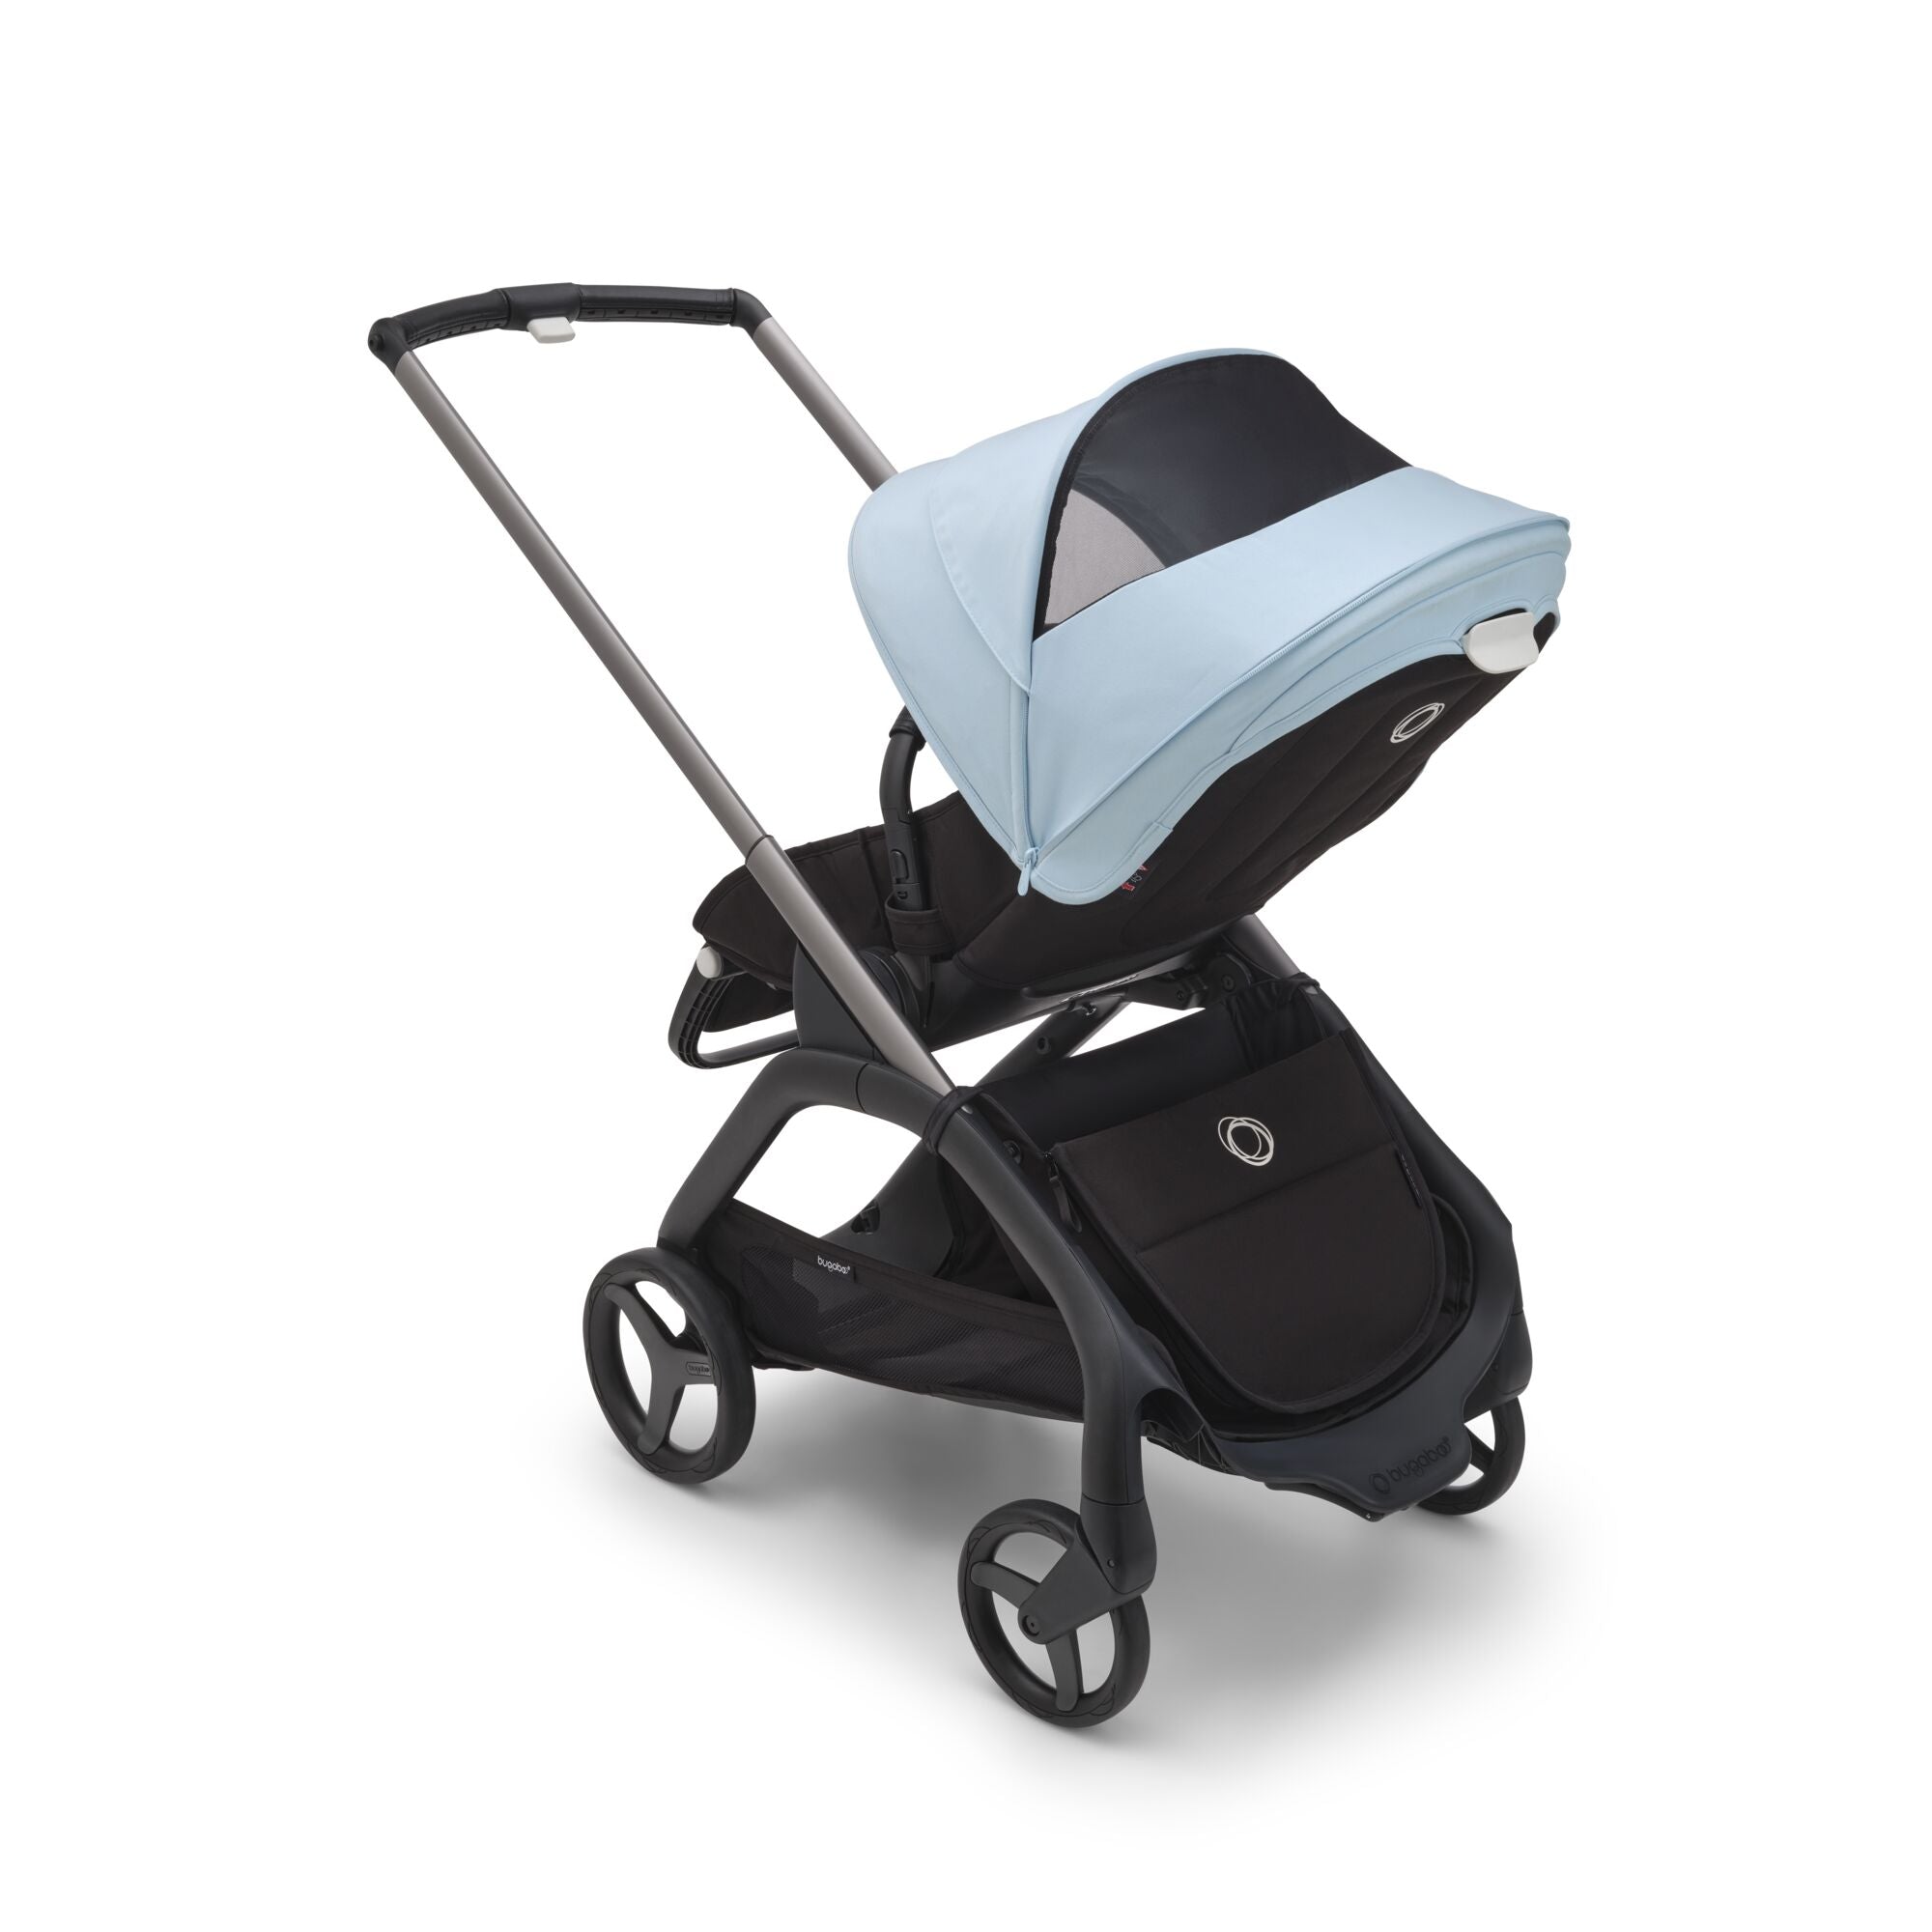 Bugaboo Dragonfly with Seat Complete Stroller - ANB Baby -8717447527206$500 - $1000